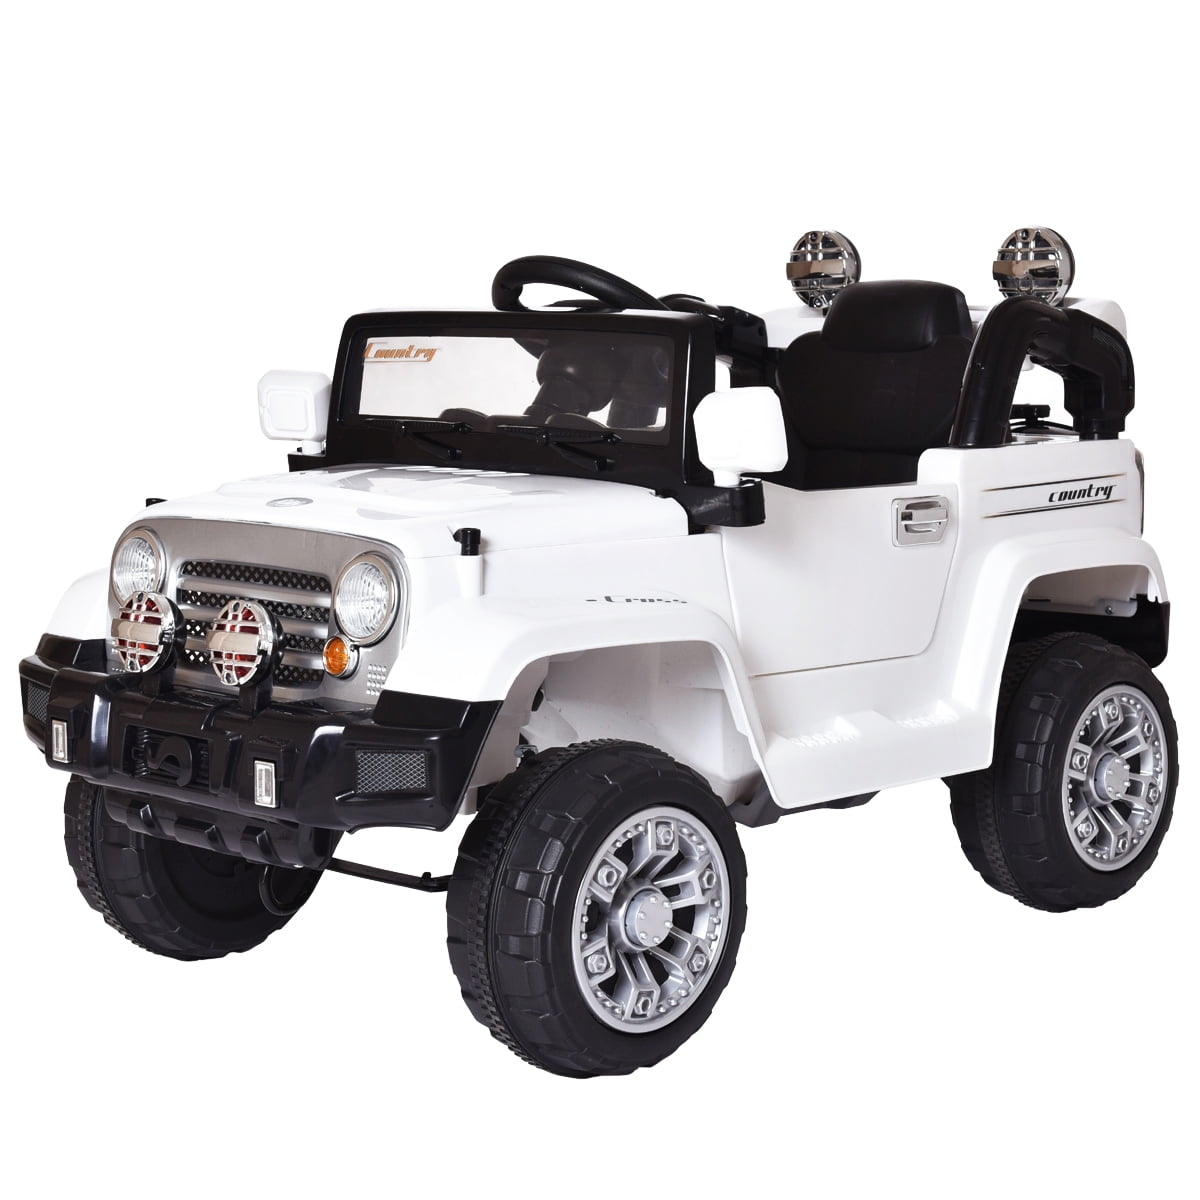 12V Kids Ride On Toy Electric Battery Powered Off-Road Truck W/ LED Lights White 